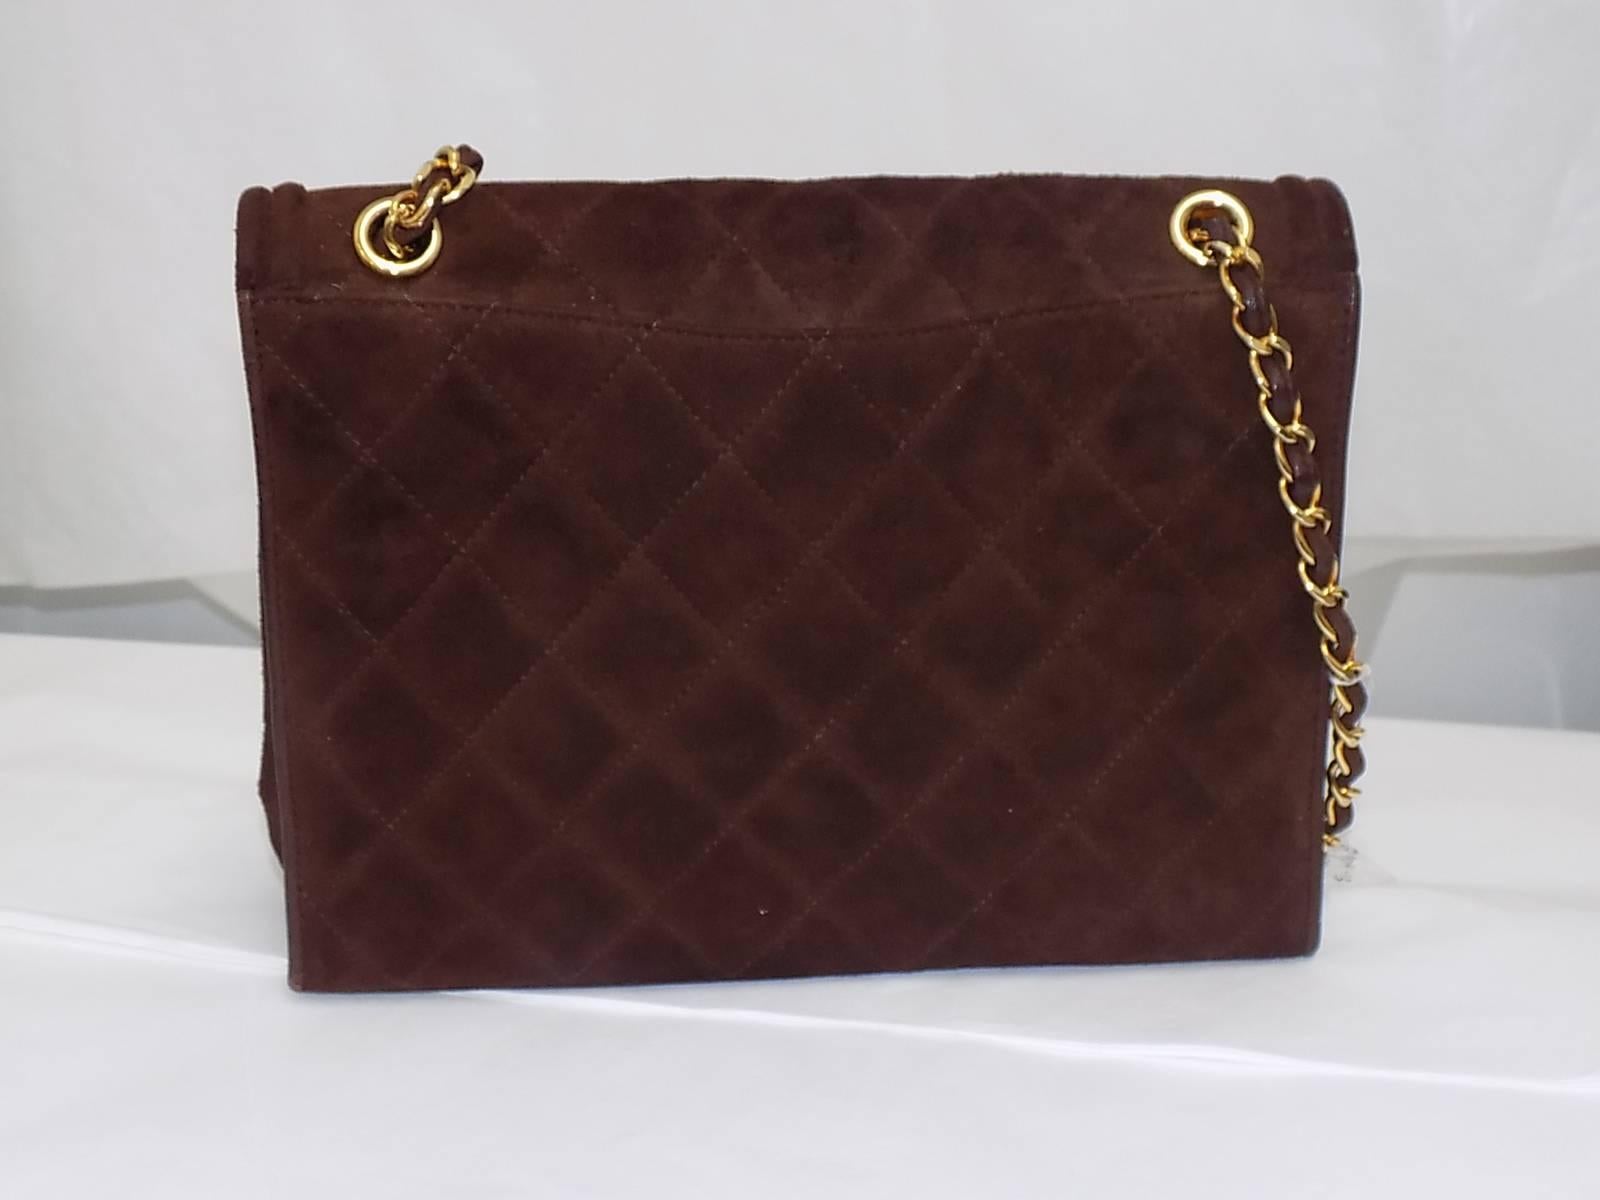 Beautiful vintage Chanel quilted suede brown suede flap bag . CC front logo. Gold tone metal and leather  double chain that could be made into one long shoulder strap. One inner zipper compartment.  Very good condition.Leather lined
Measures 9